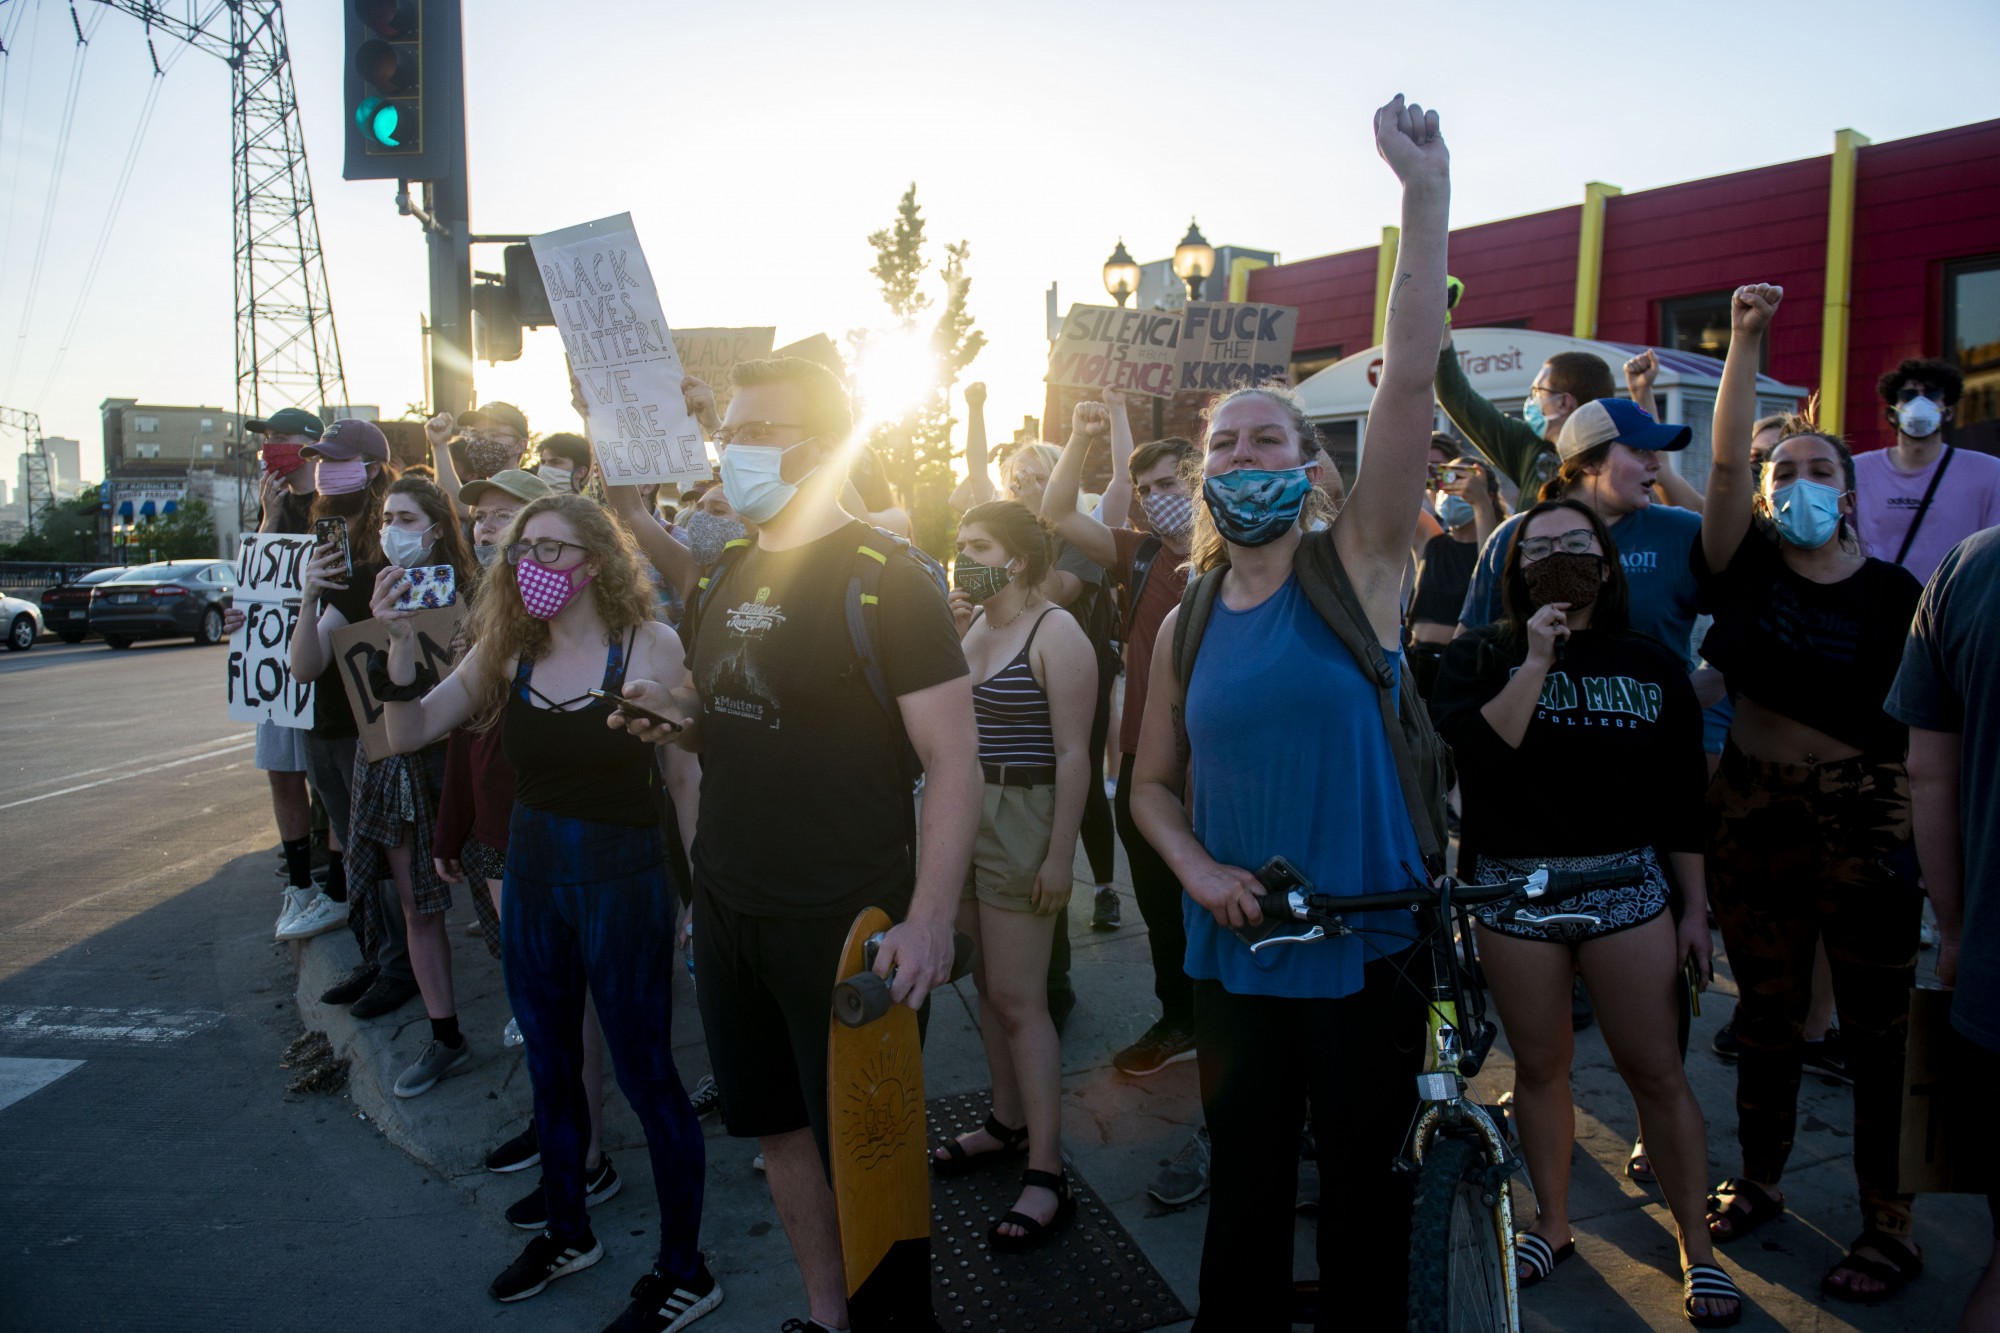 Protesters react to SWAT officers patrolling the intersection of Southeast 4th Street and 15th Avenue Southeast just after 8 p.m. on Monday, June 1. Several people were arrested during the mostly student-led demonstration halting traffic at the intersection.